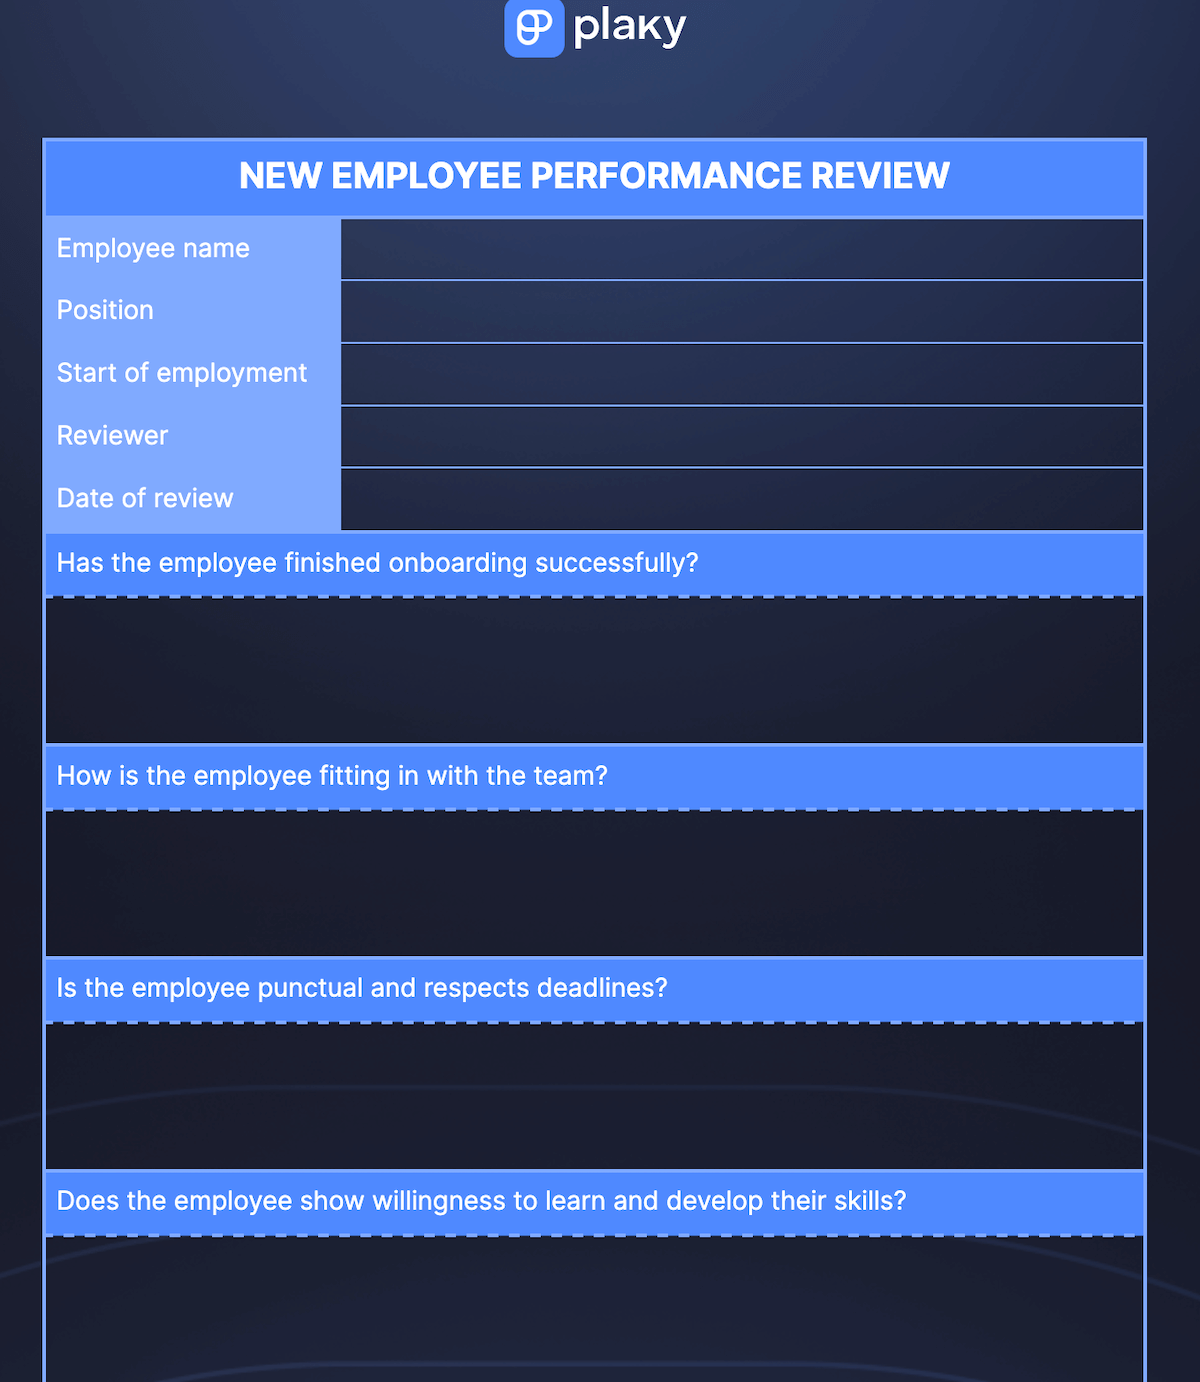 New employee performance review